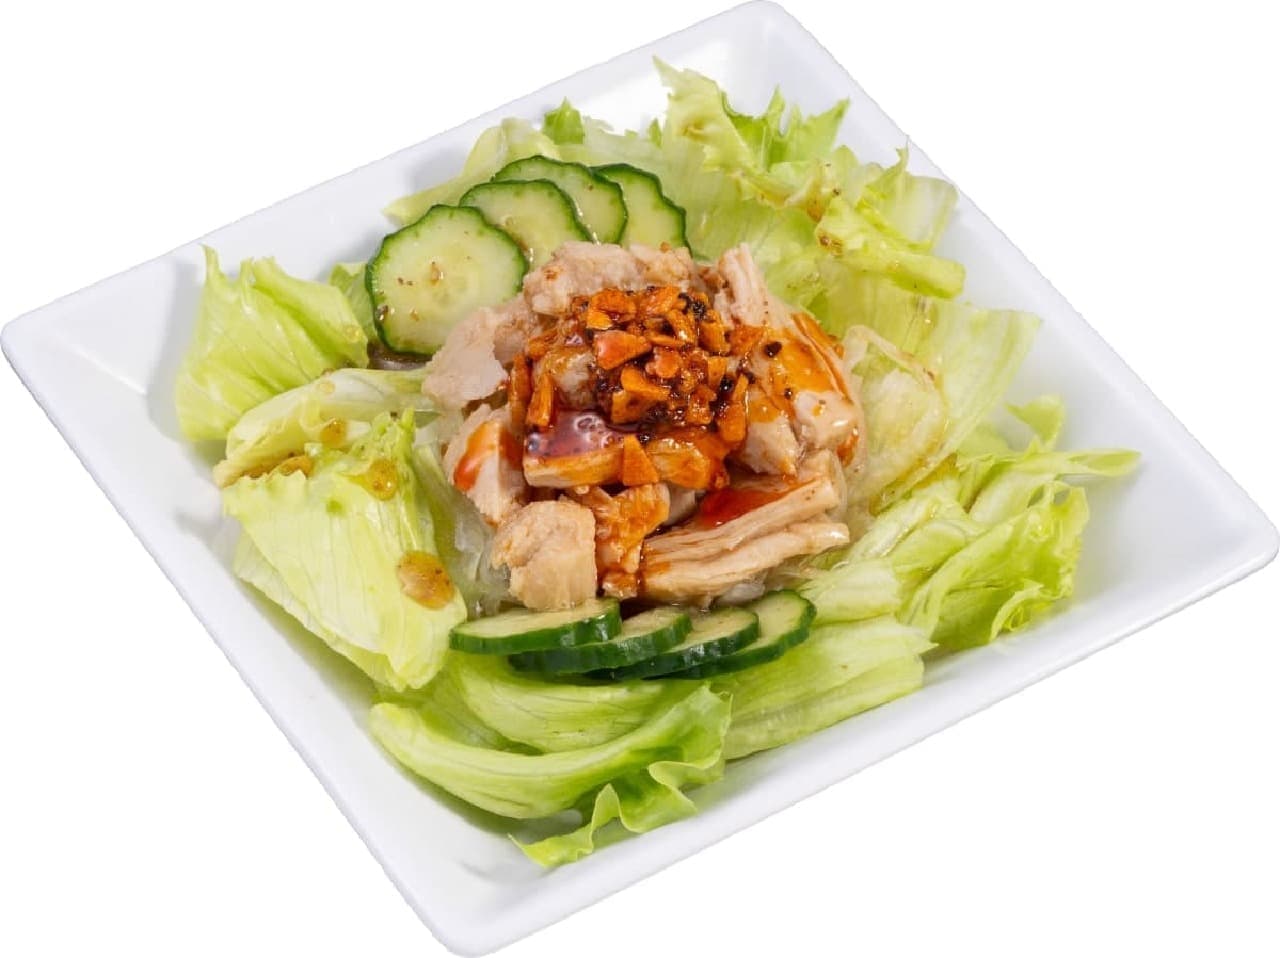 Kappa Sushi "Soybean Meat Salad with 4.5g Protein - Bo-Bo Chicken Style